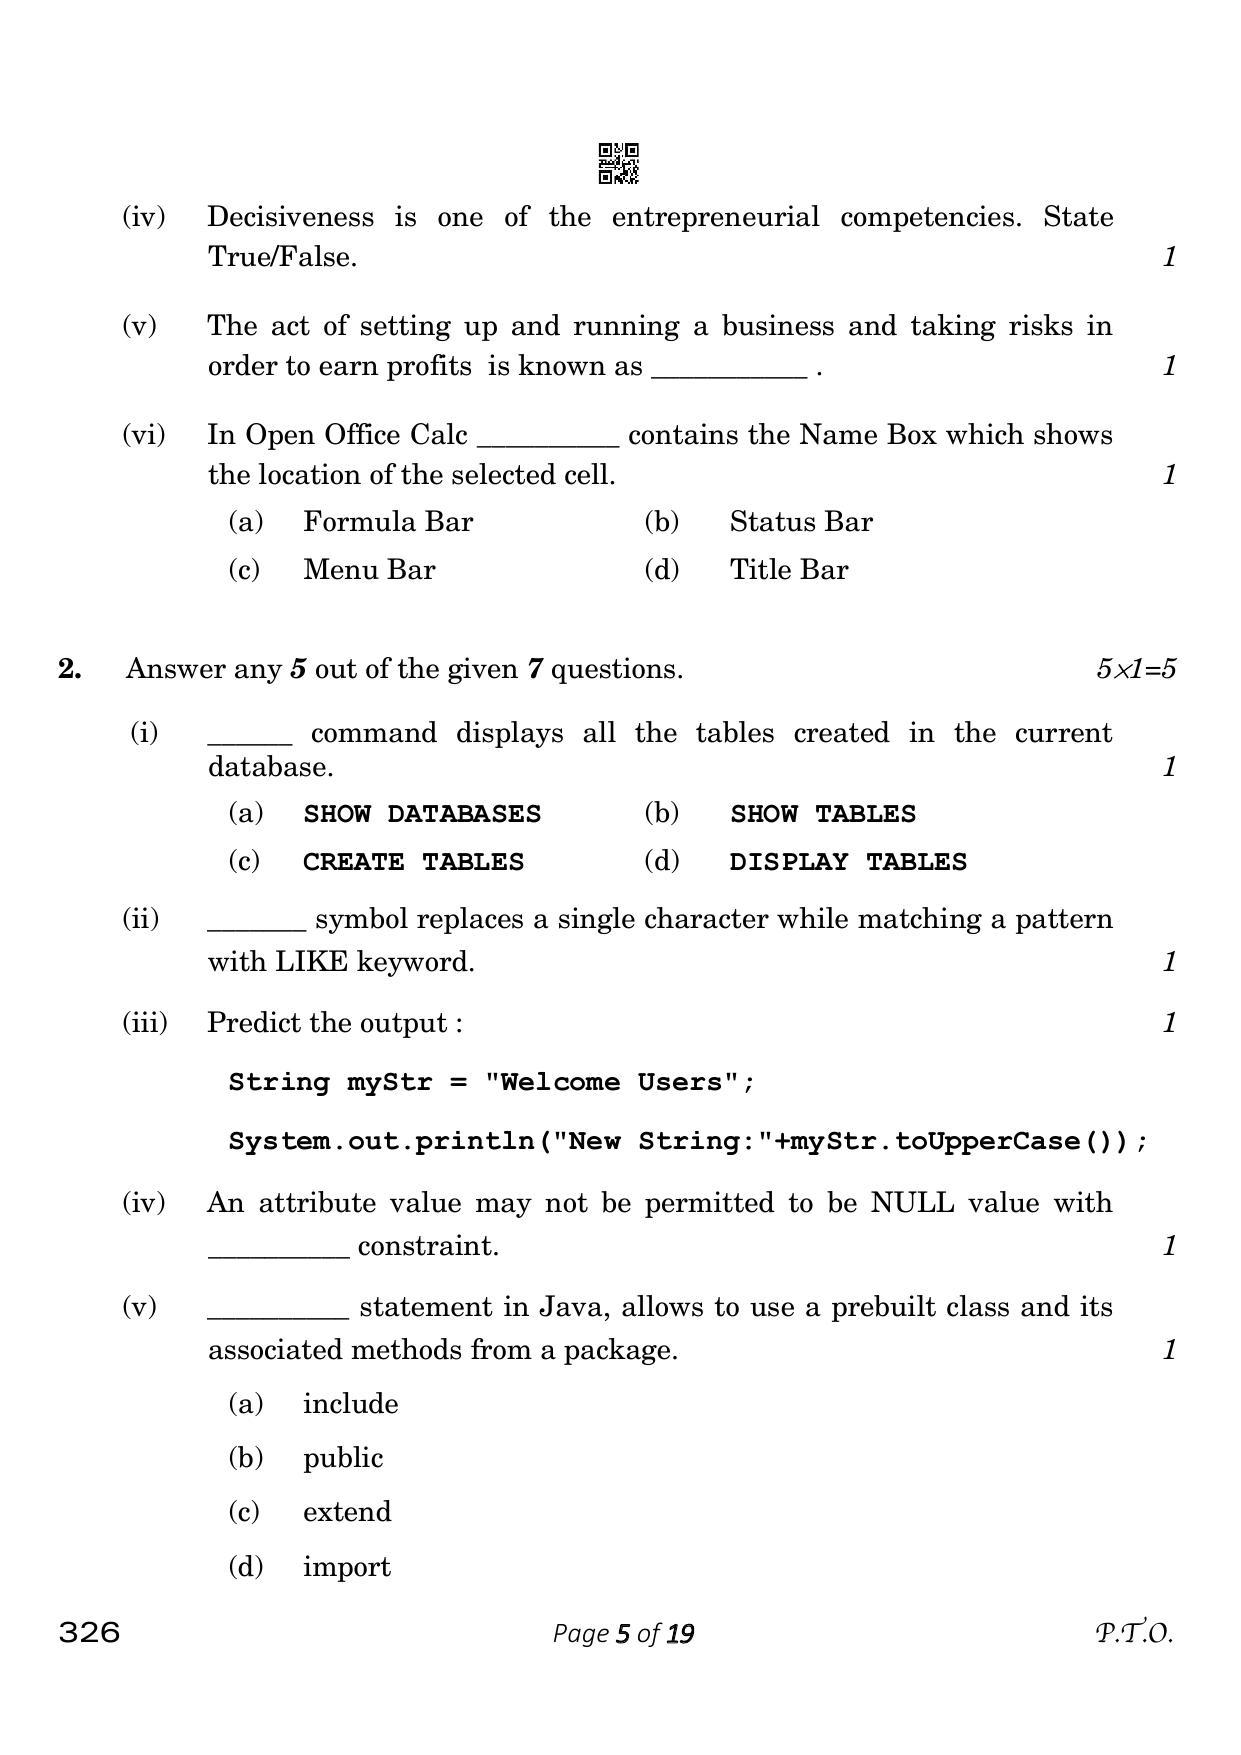 CBSE Class 12 326_Information Technology 2023 Question Paper - Page 5